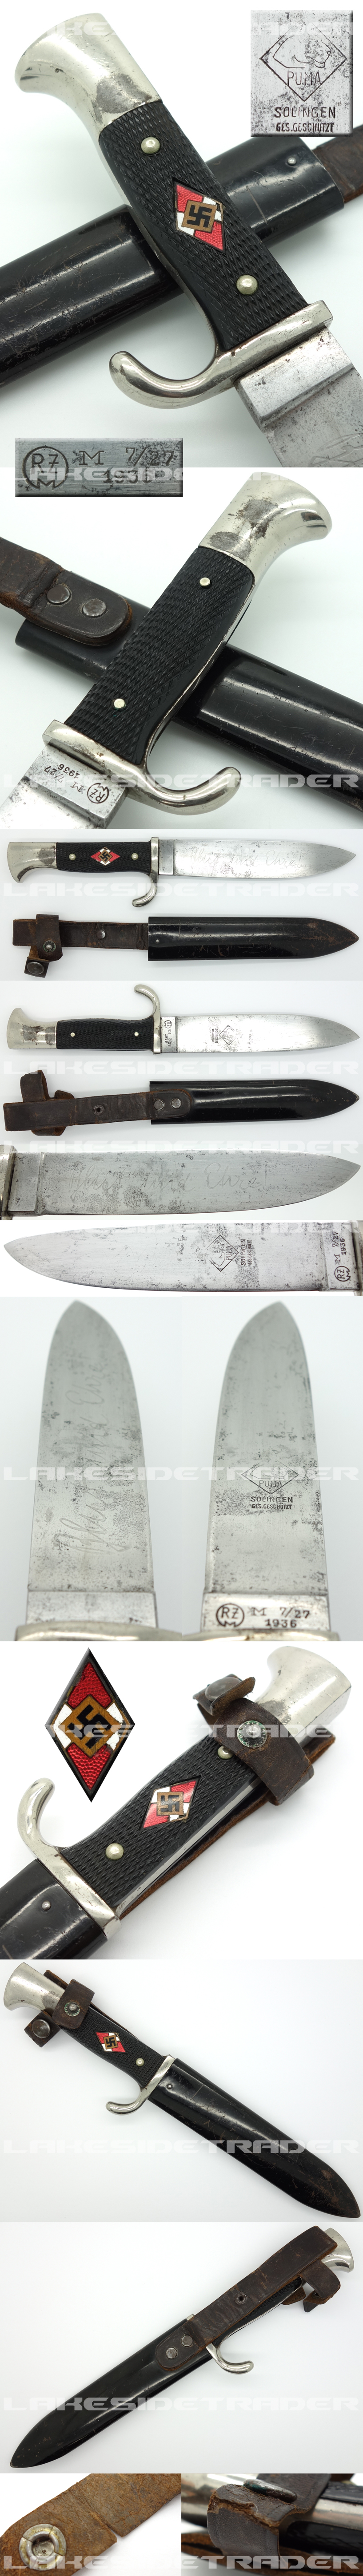 Transitional Hitler Youth Knife by Puma 1936